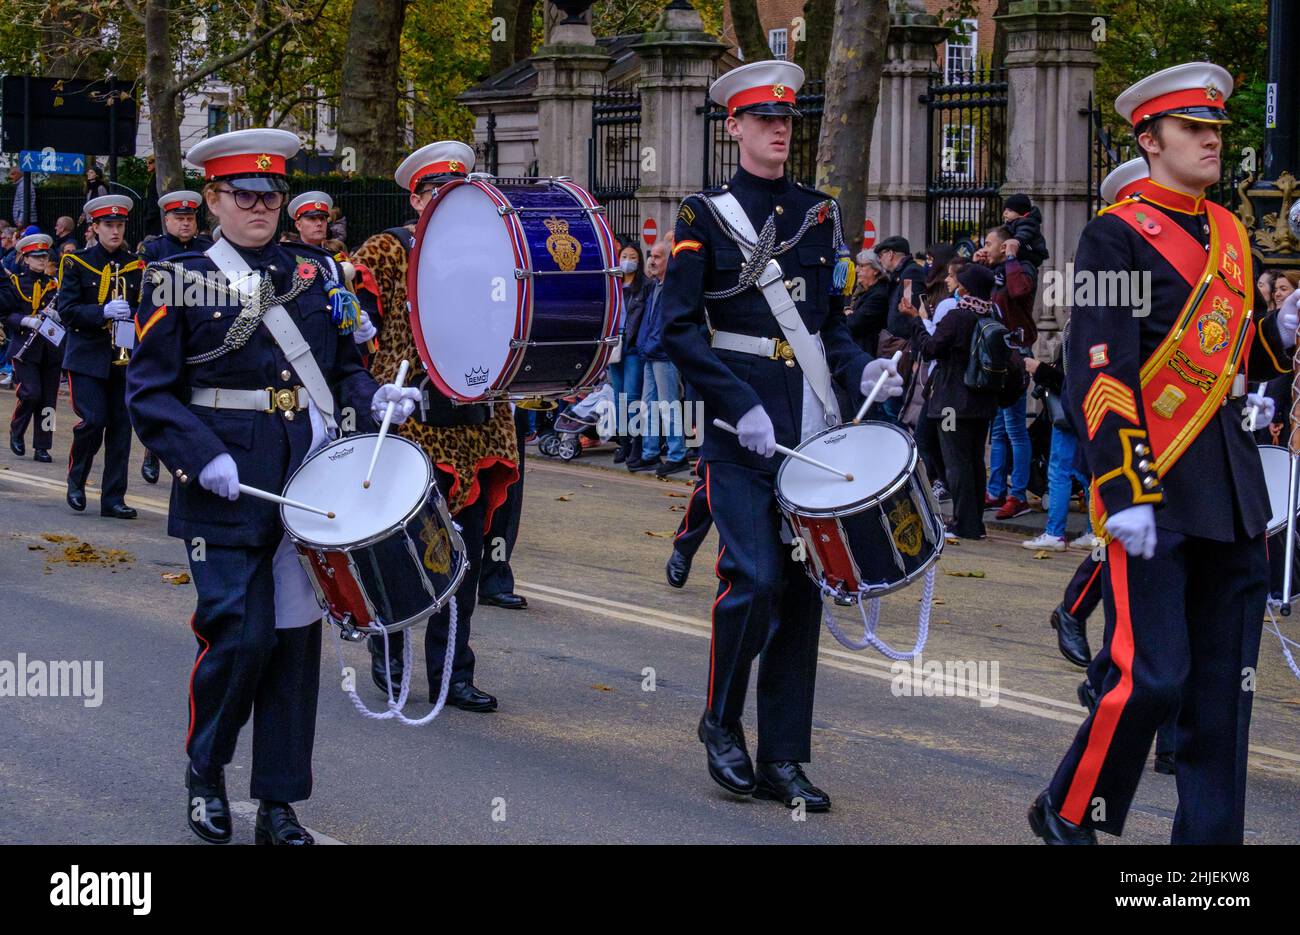 Young people & men play drums marching with the Surbiton Rbl Youth Marching Band at the Lord Mayor’s Show 2021, Victoria Embankment, London. Stock Photo